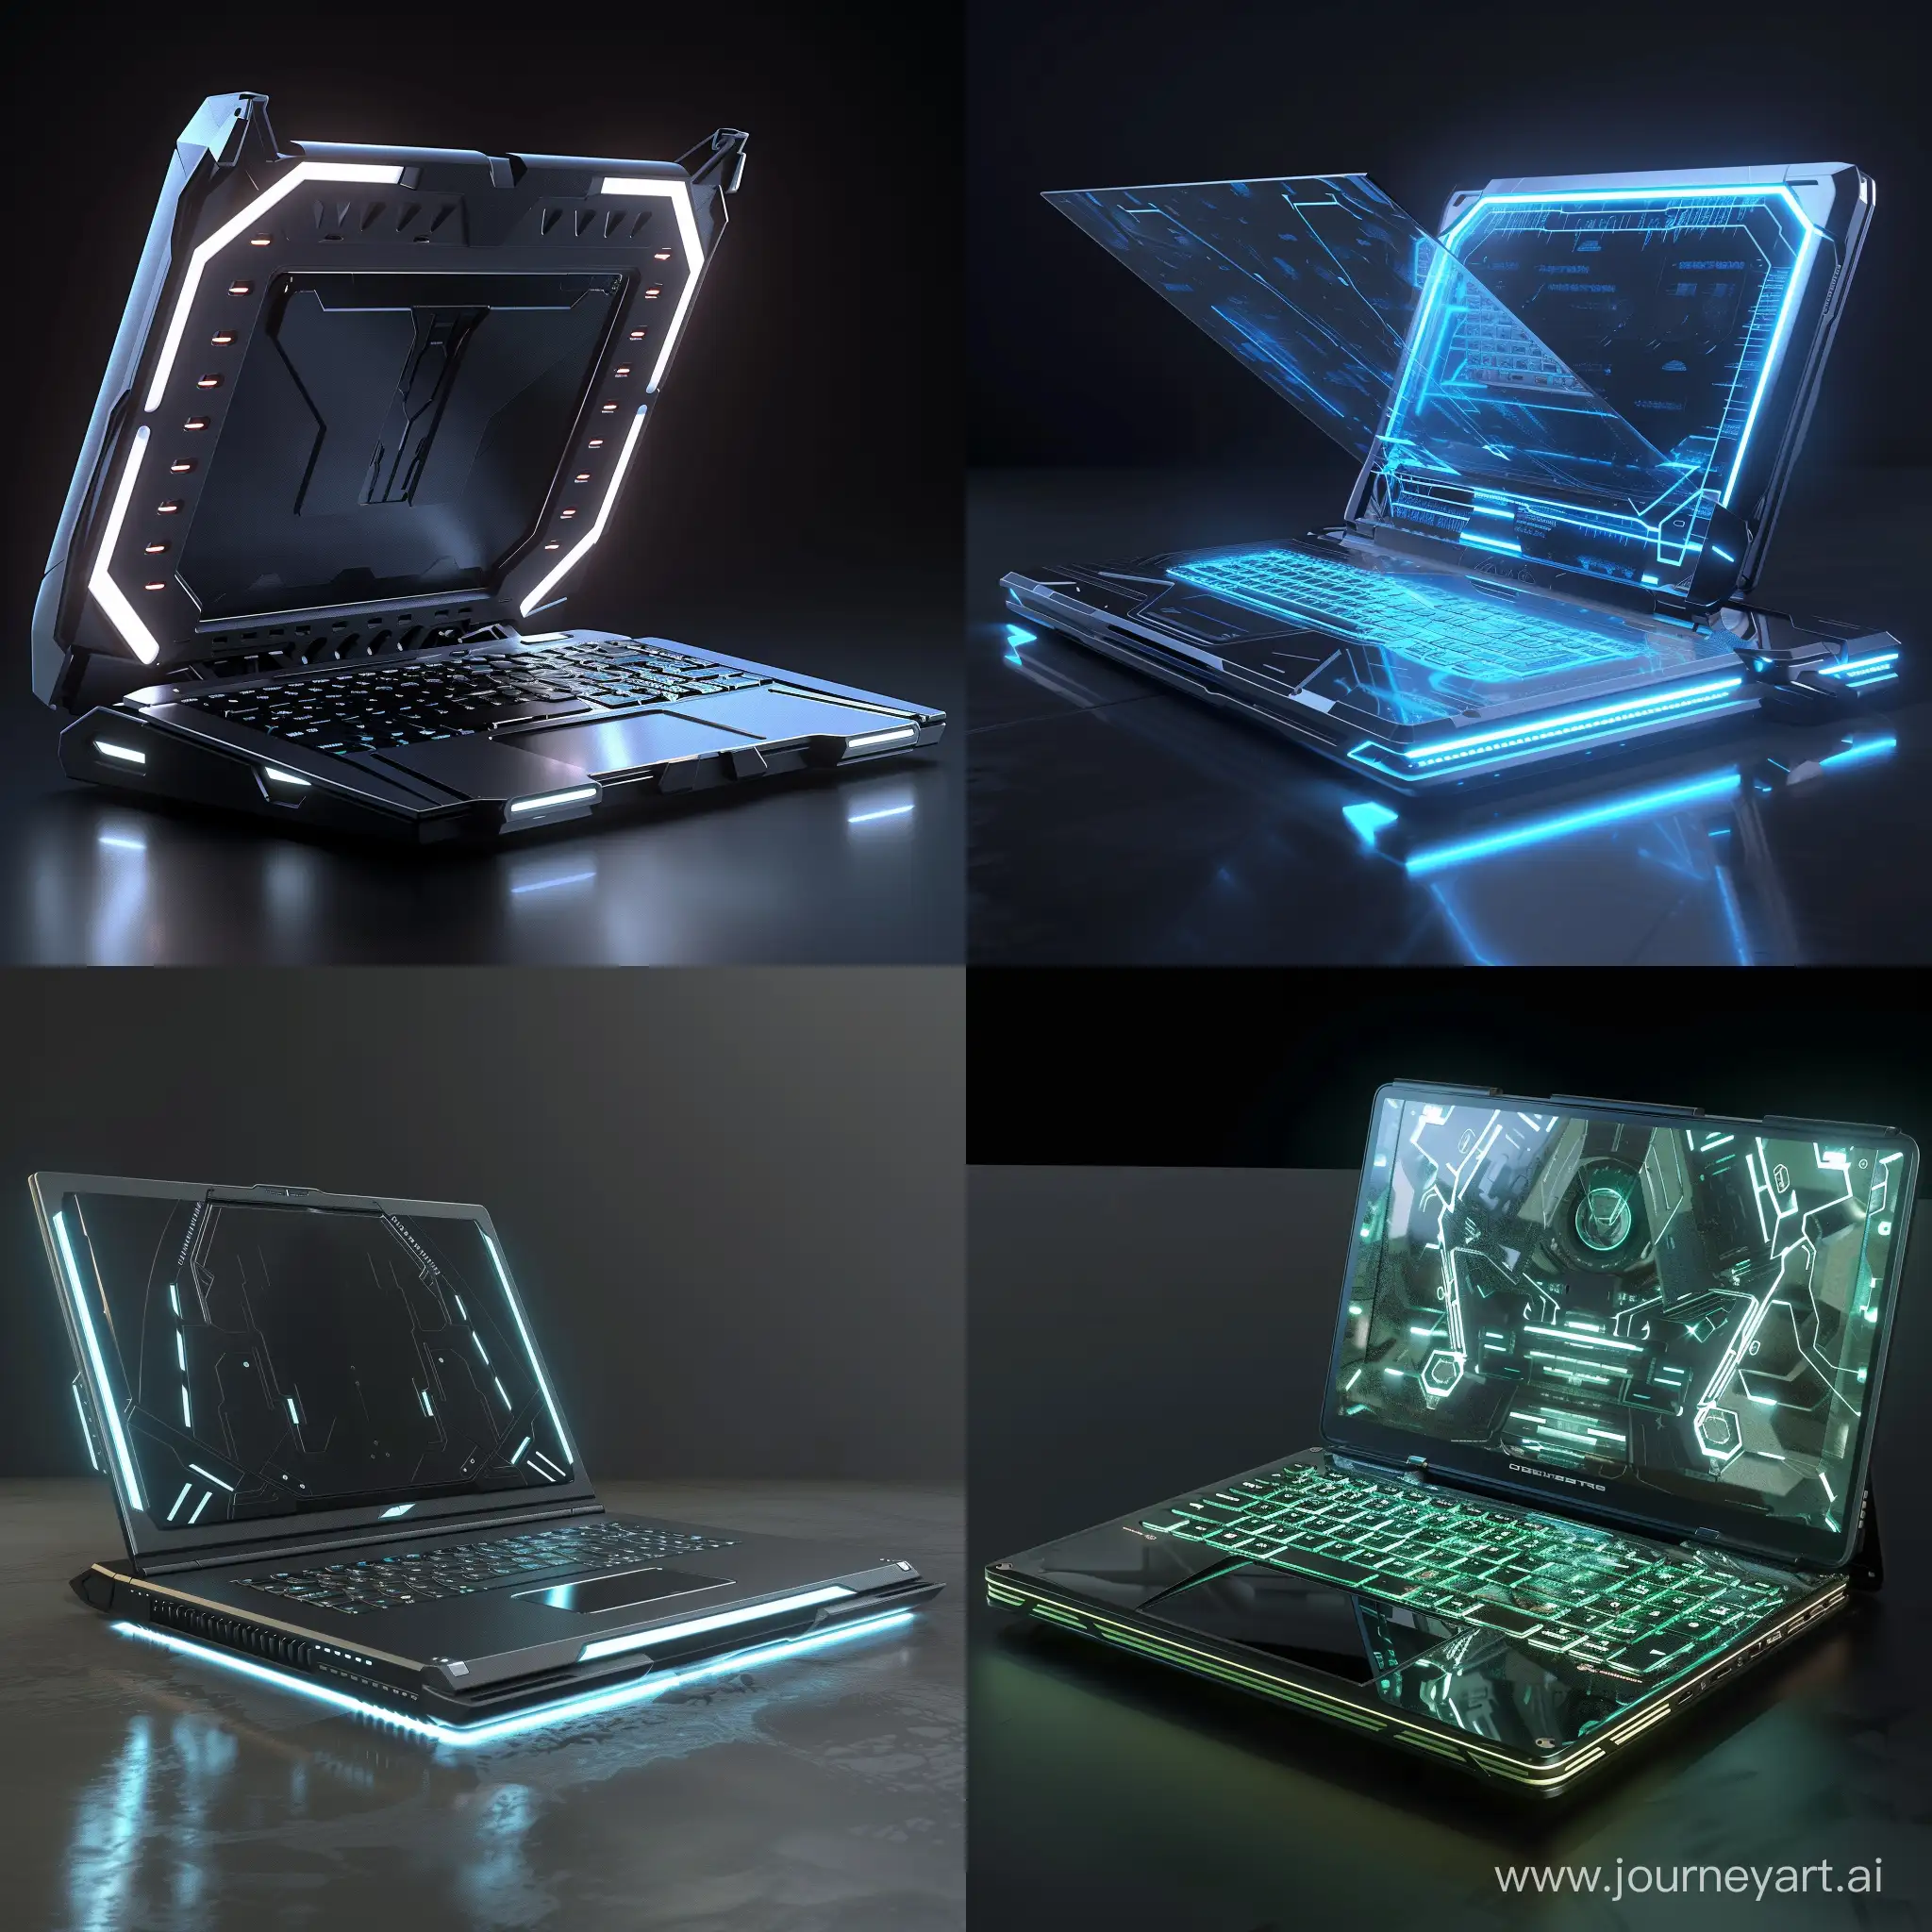 Futuristic-Shockproof-Laptop-with-Octane-Render-Technology